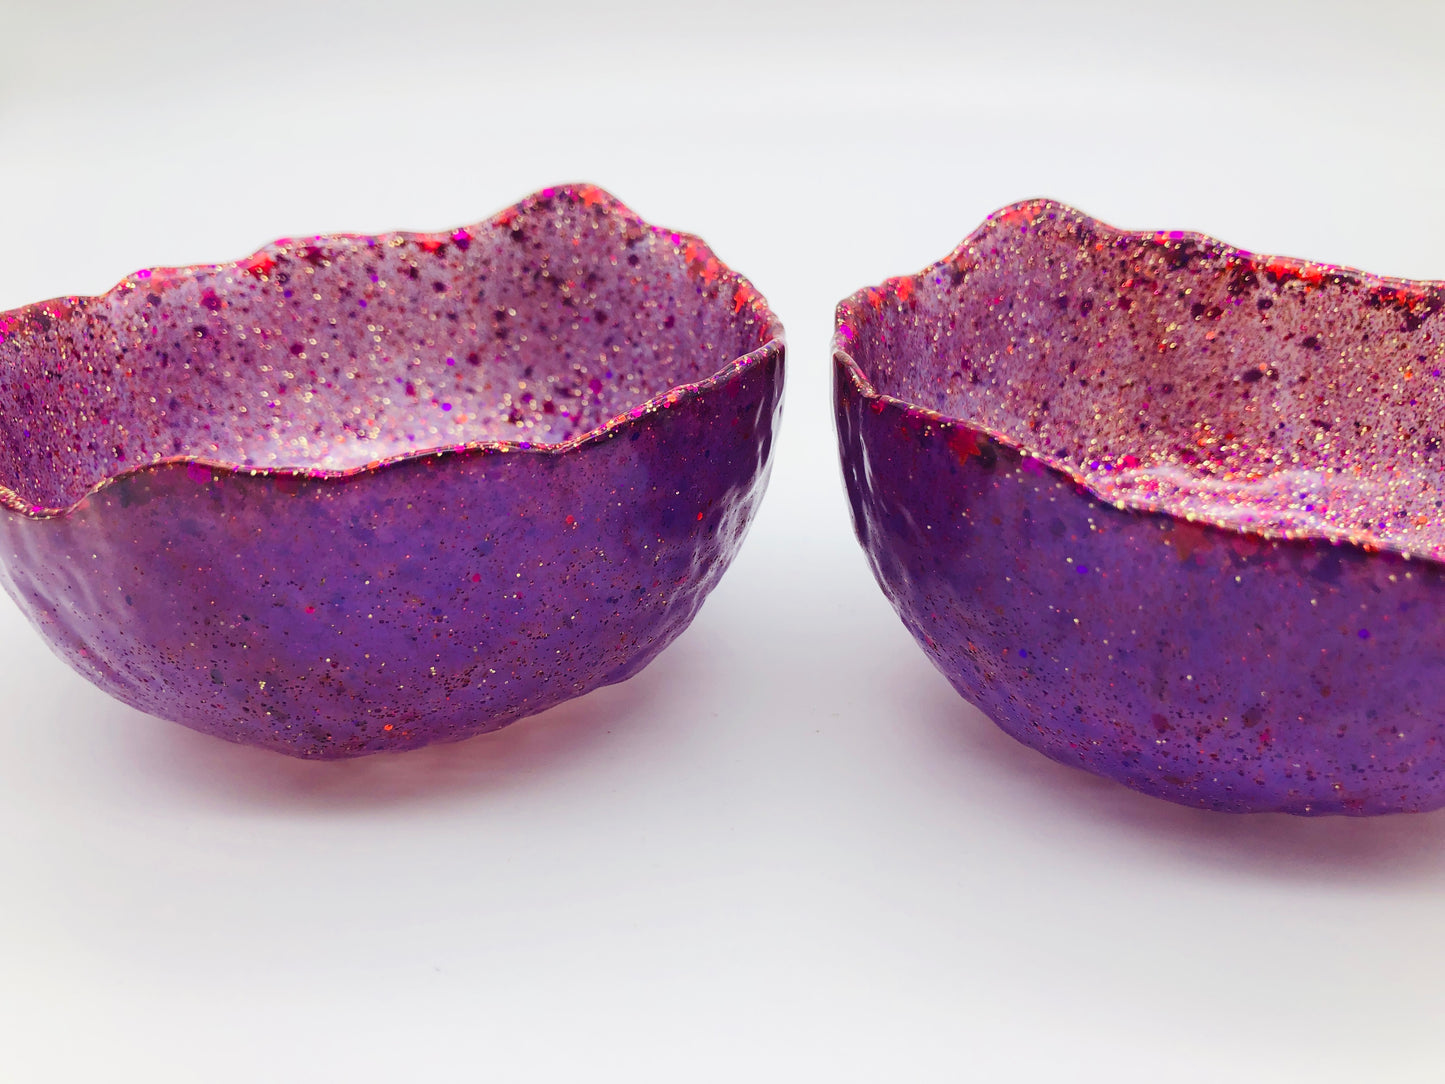 Bowls, Pots & Troves - Gorgeous Resin Collection 💜